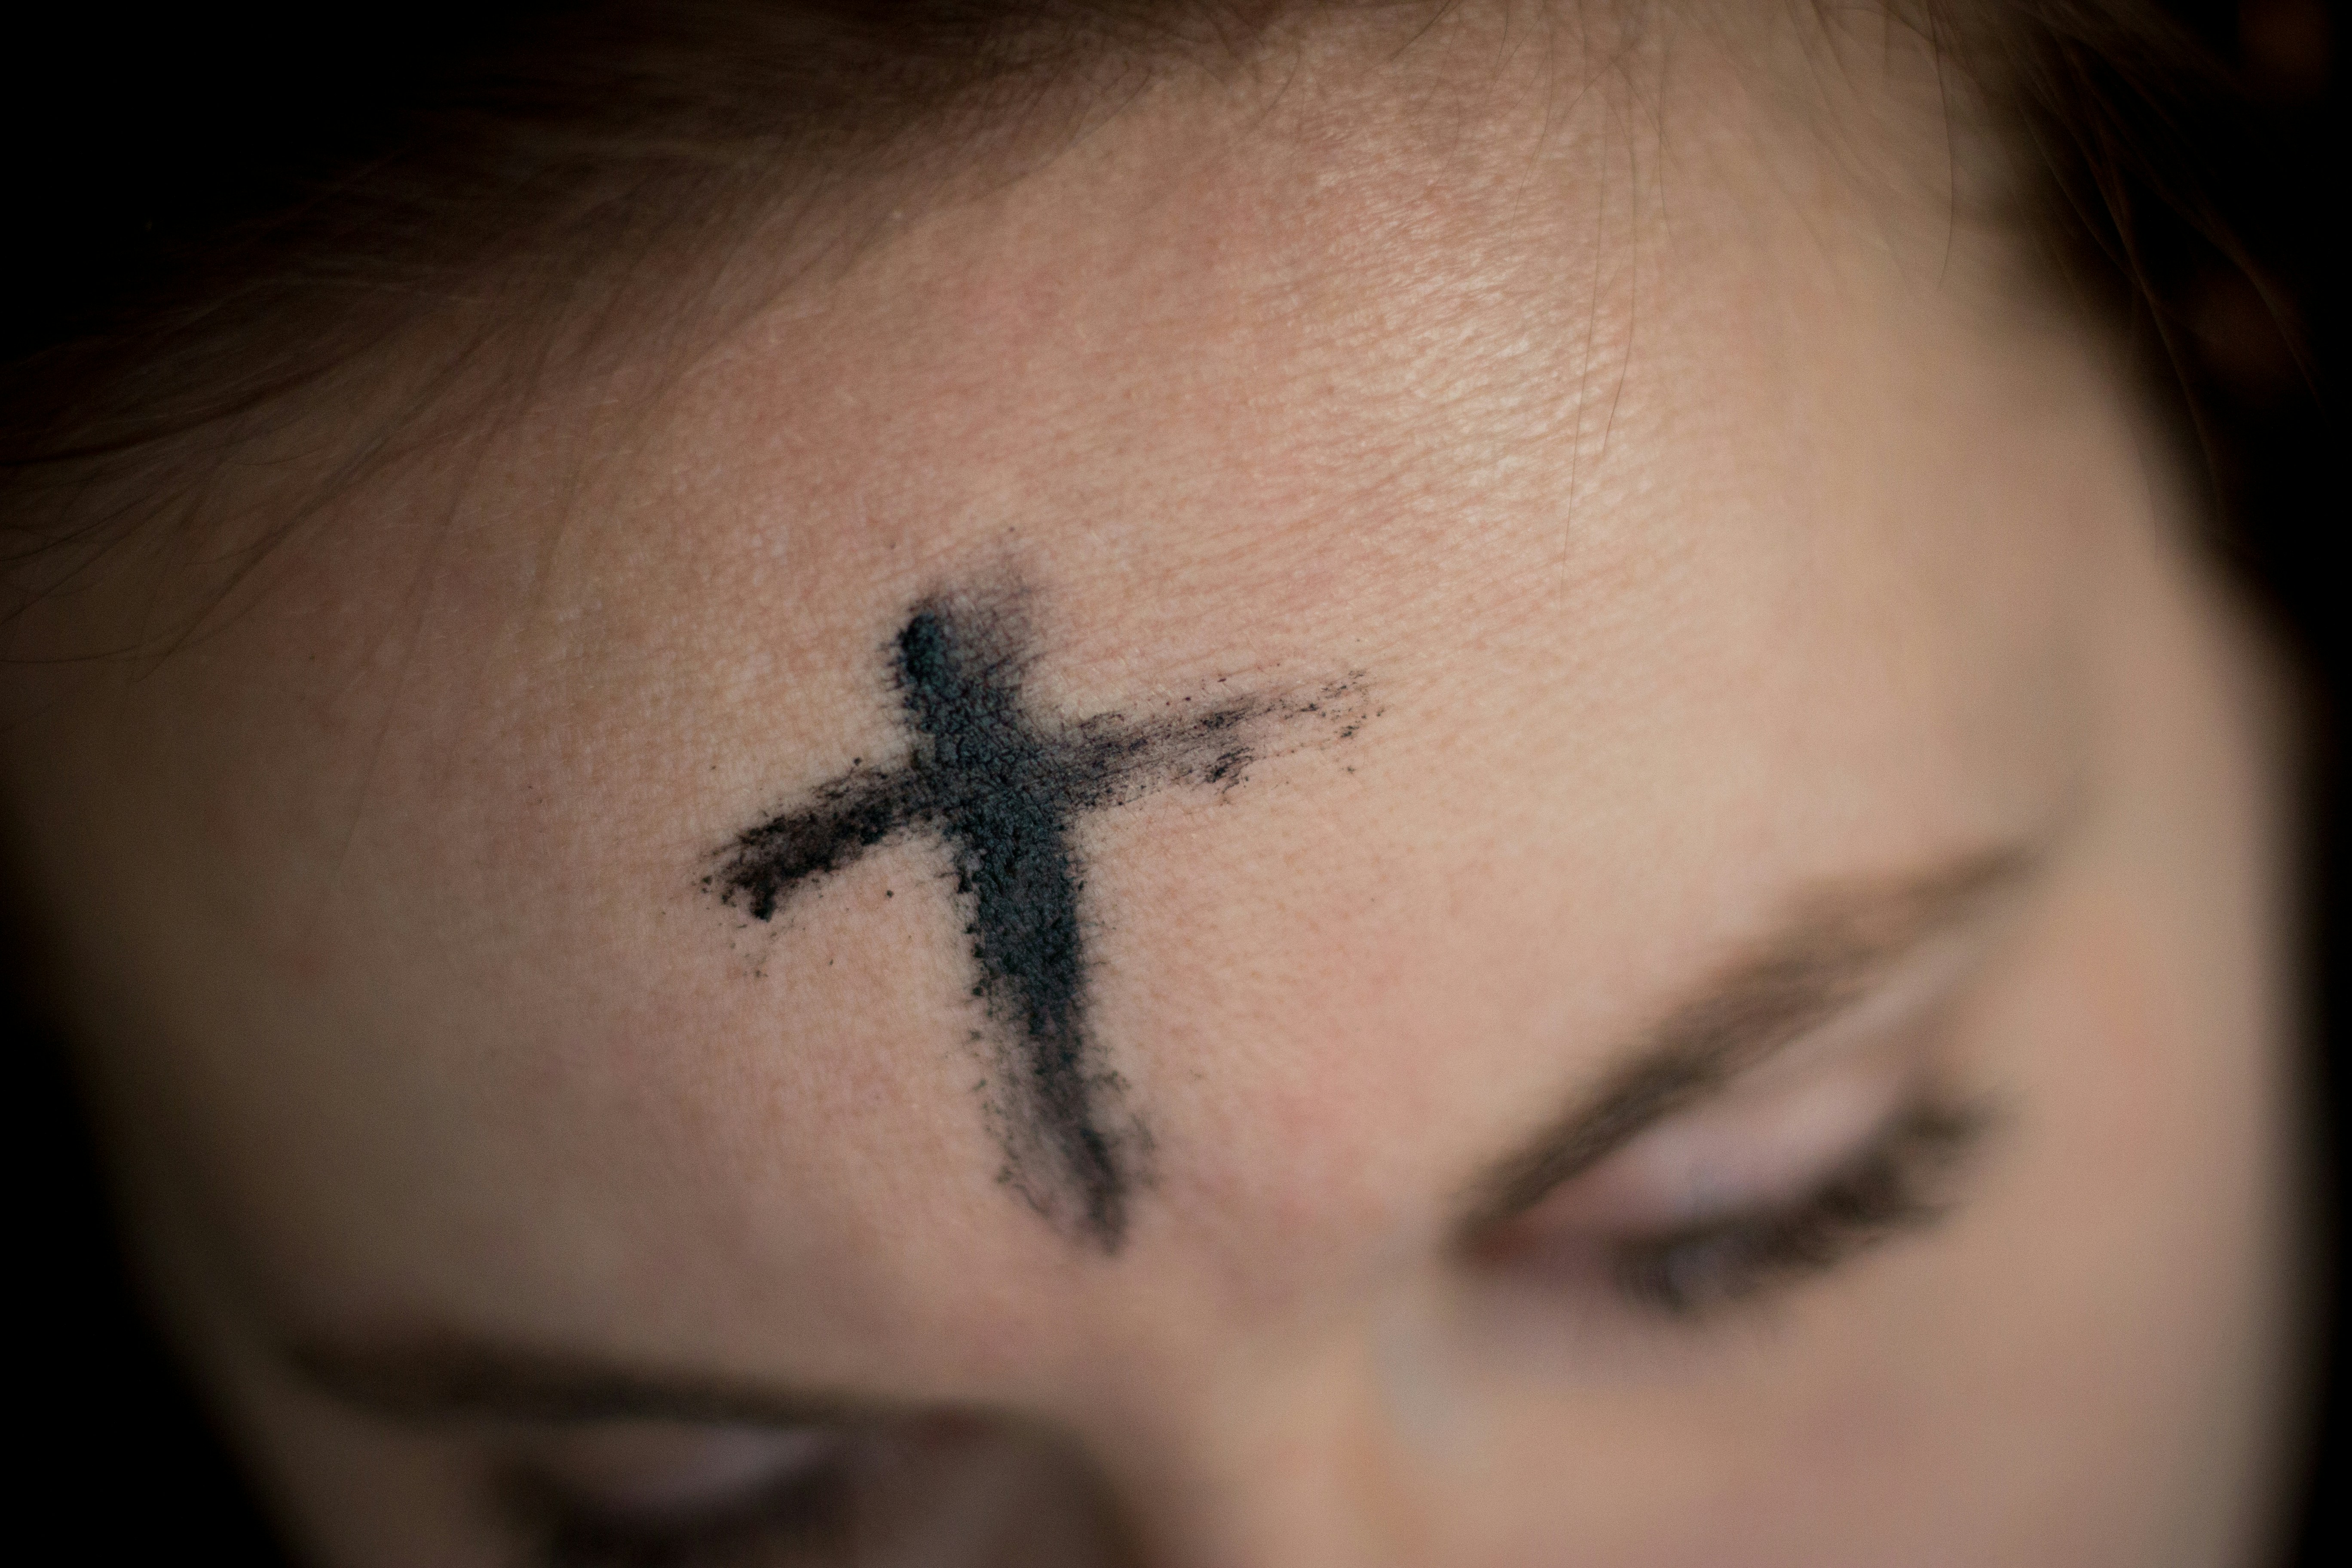 a face showing an ash cross during lent